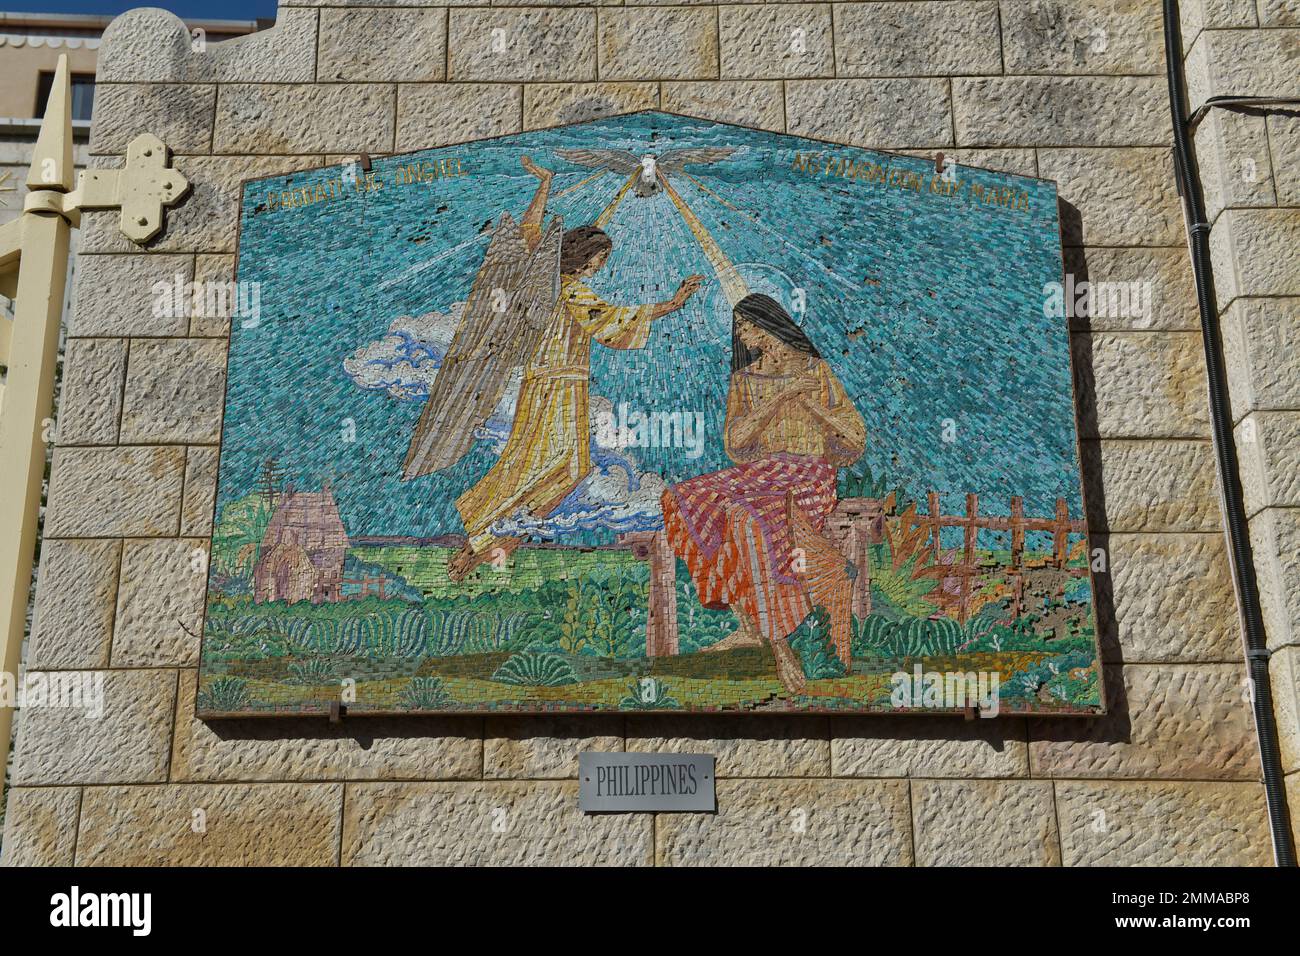 Image of Mary from the Philippines, Basilica of the Annunciation, Nazareth, Israel Stock Photo